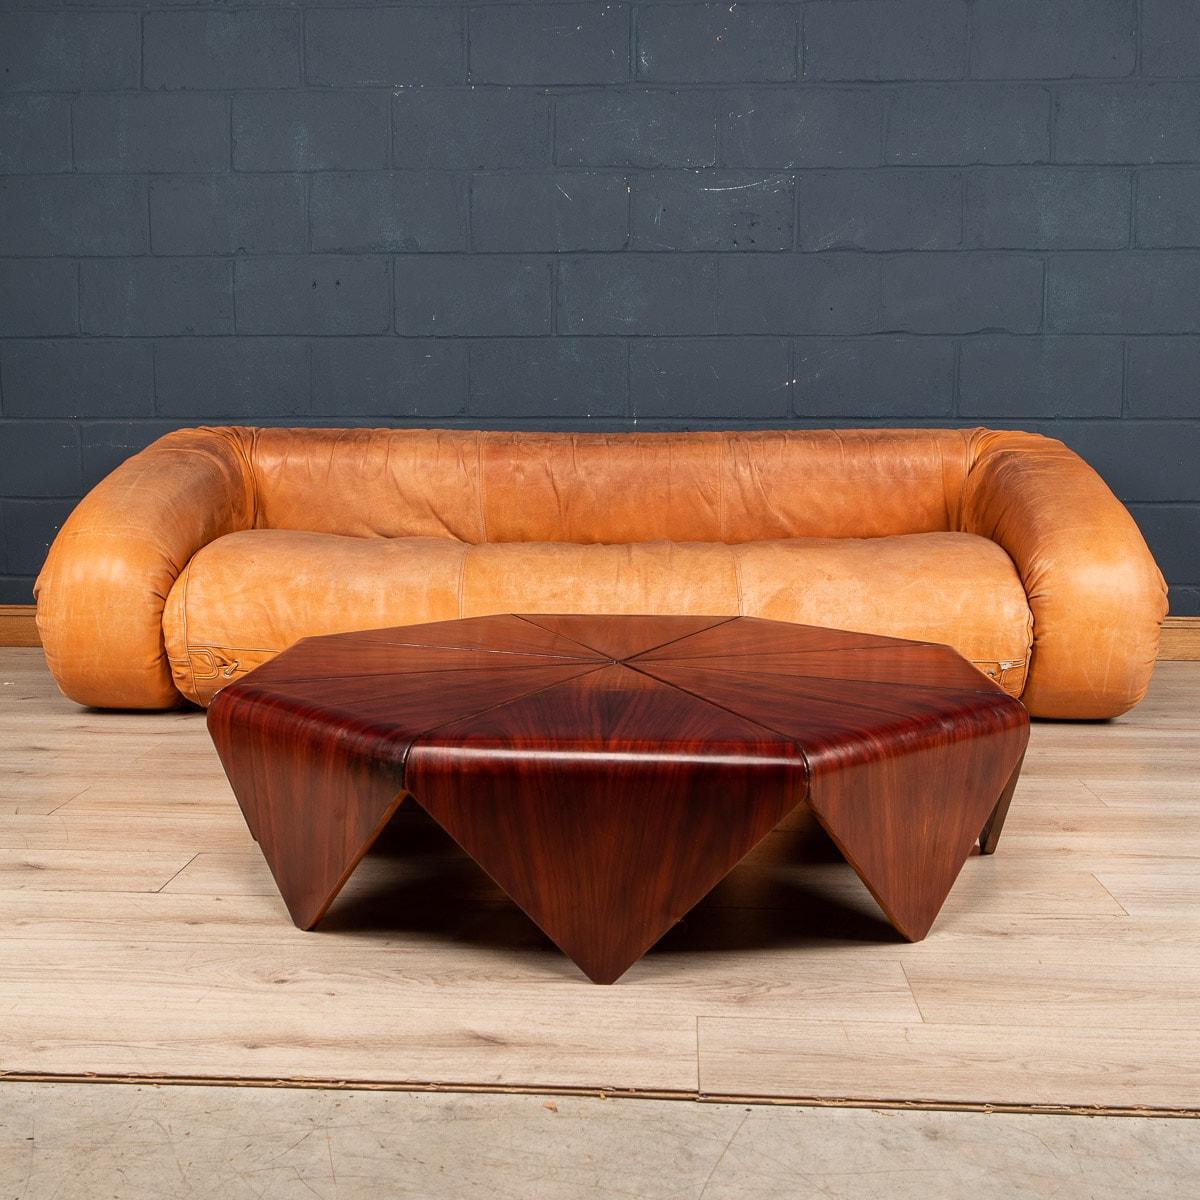 A large and impressive ‘Petalas’ coffee table in very good condition designed by Jorge Zalszupin and manufactured by his own company L’Atelier, Brazil, 1959. The table is formed by eight separate “petals” made out of bent Brazilian Jacaranda